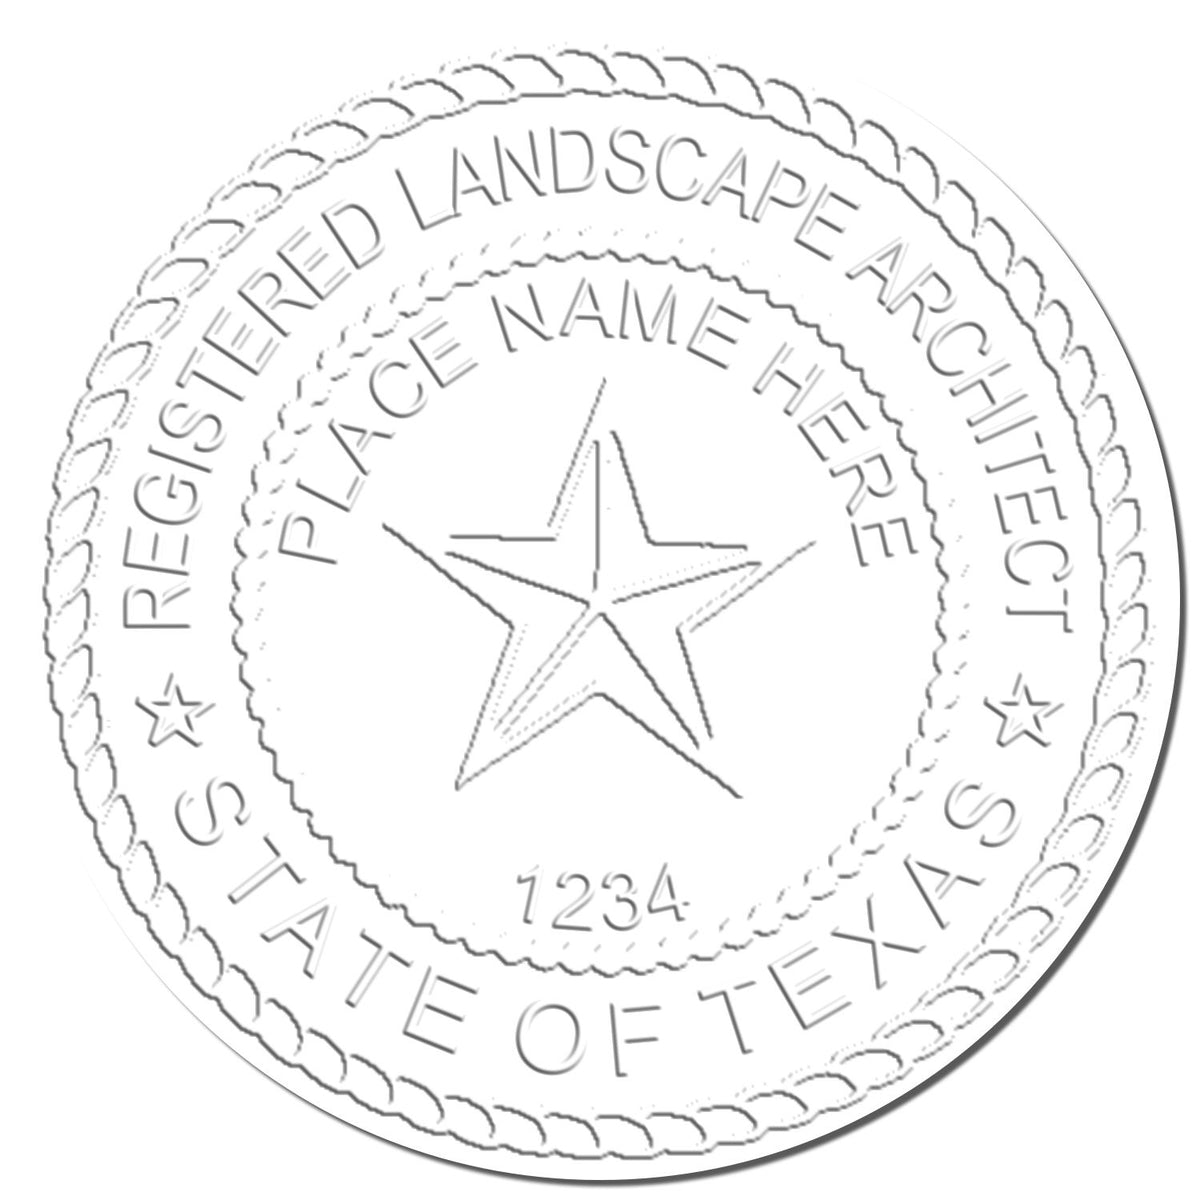 This paper is stamped with a sample imprint of the Soft Pocket Texas Landscape Architect Embosser, signifying its quality and reliability.